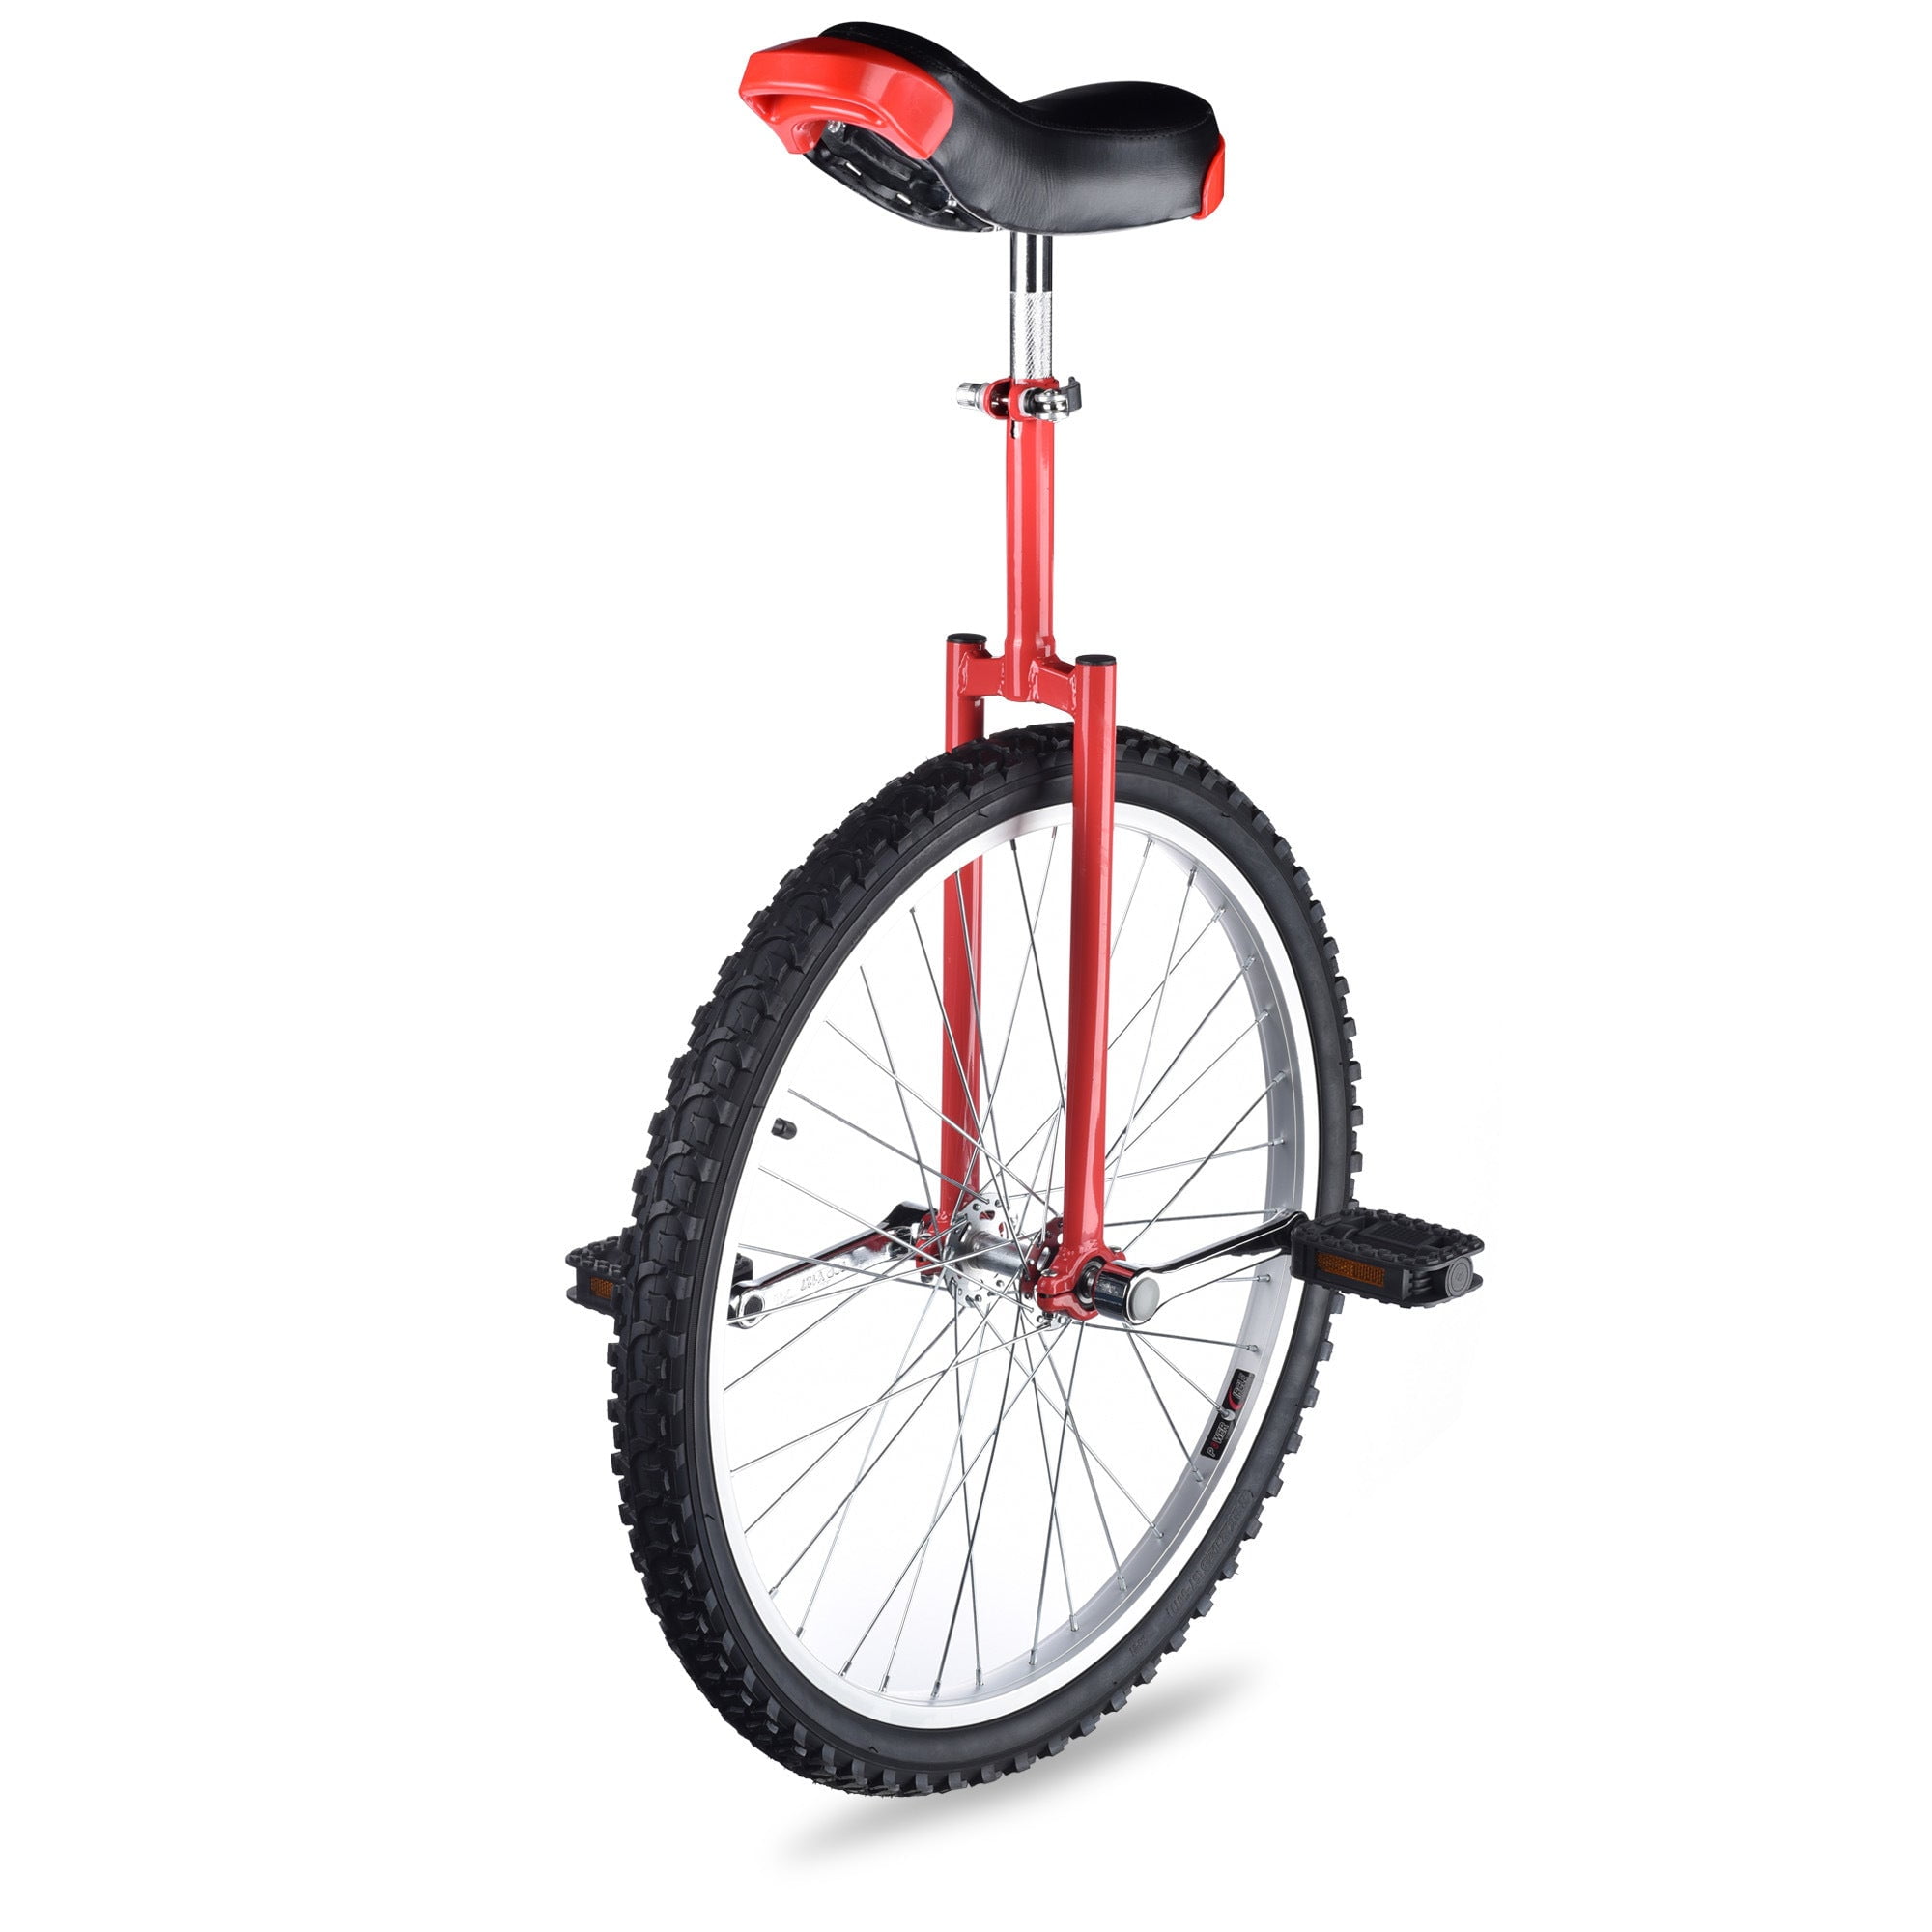 16 Inches Wheel Skid Proof Tread Pattern Unicycle W/ Stand Uni-Cycle Bike Cycling Red 